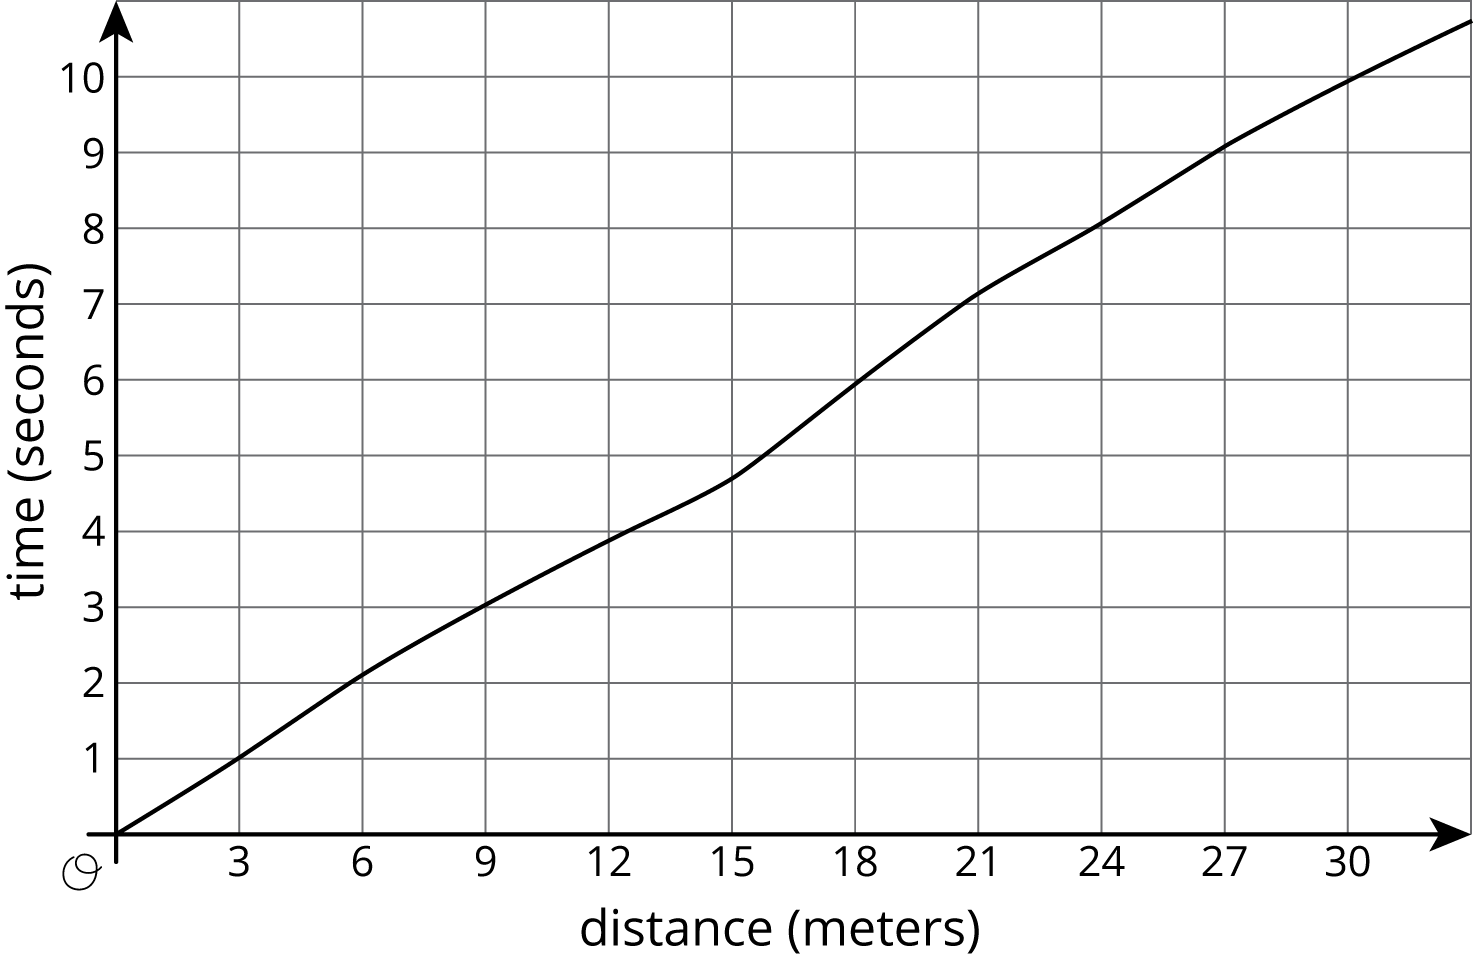 The graph of a curve in the coordinate plane with the origin labeled “O”. The horizontal axis is labeled “distance, in meters” and the numbers 0 through 30, in increments of 3, are indicated. The vertical axis is labeled “time, in seconds” and the numbers 0 through 10 are indicated. The curve begins at the origin and moves steadily upward and to the right. The line passes through the points with approximate coordinates 3 comma 1, 12 comma 4, and 30 comma 10.